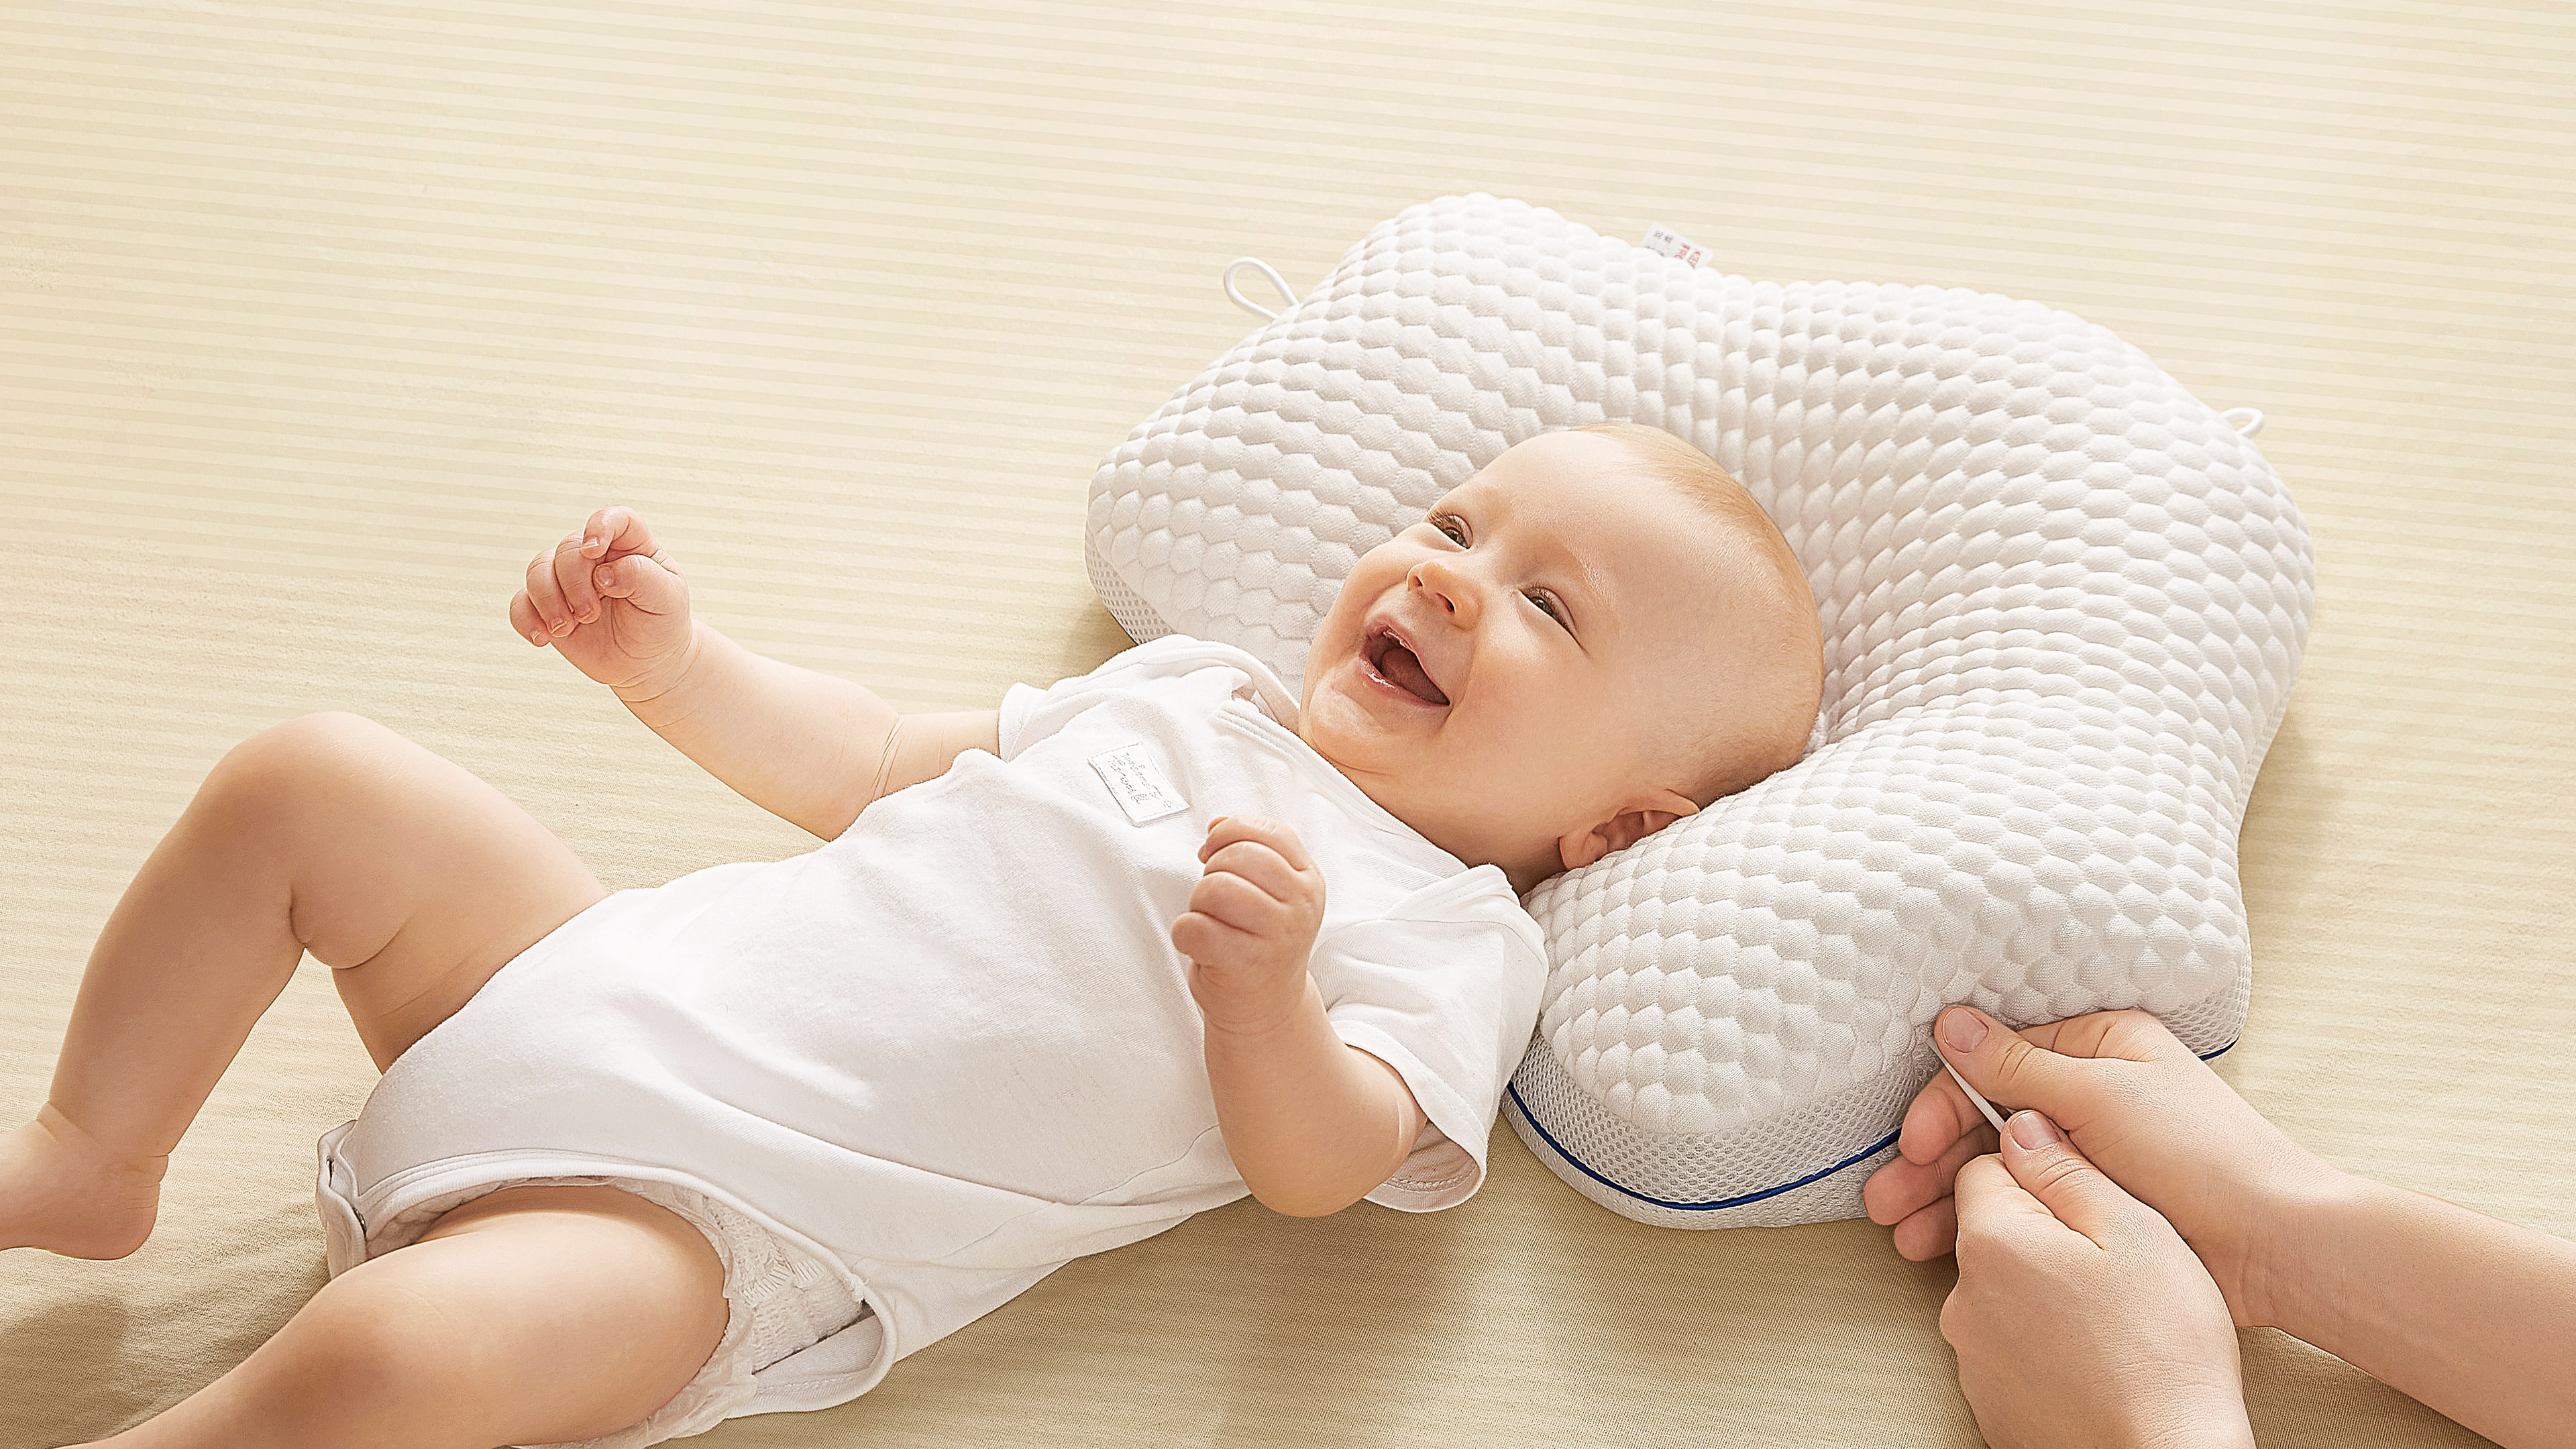 Pacify Shaping Pillow